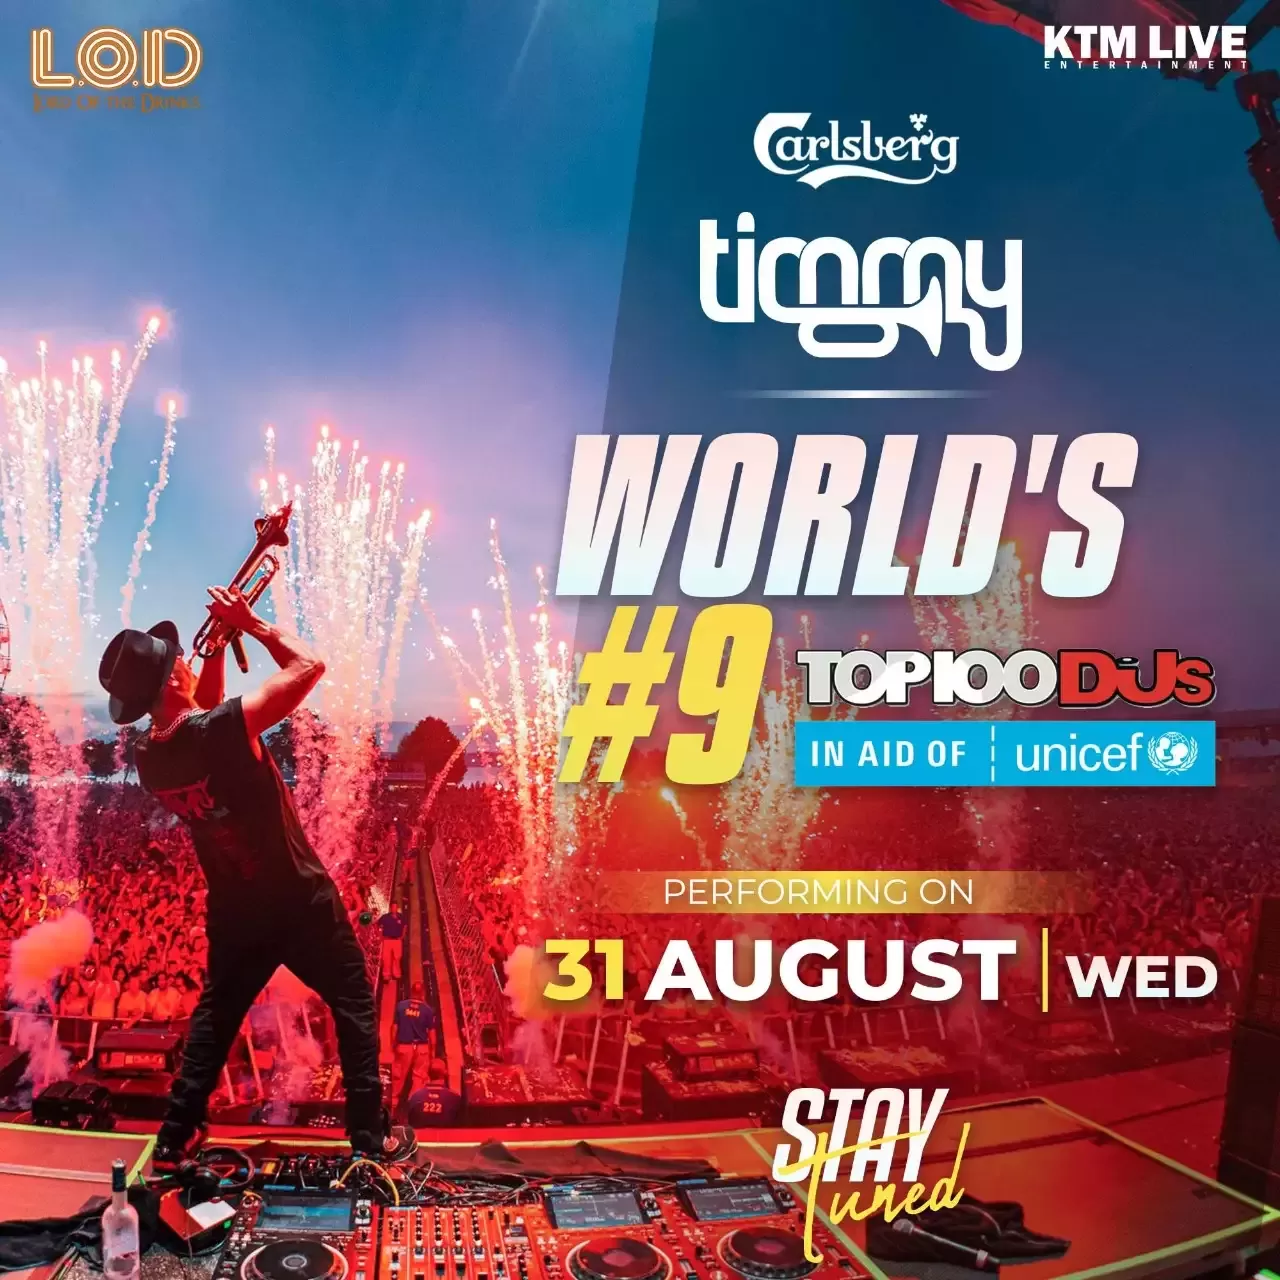 DJ Timmy Trumpet Performing At Lord of the Drinks LOD